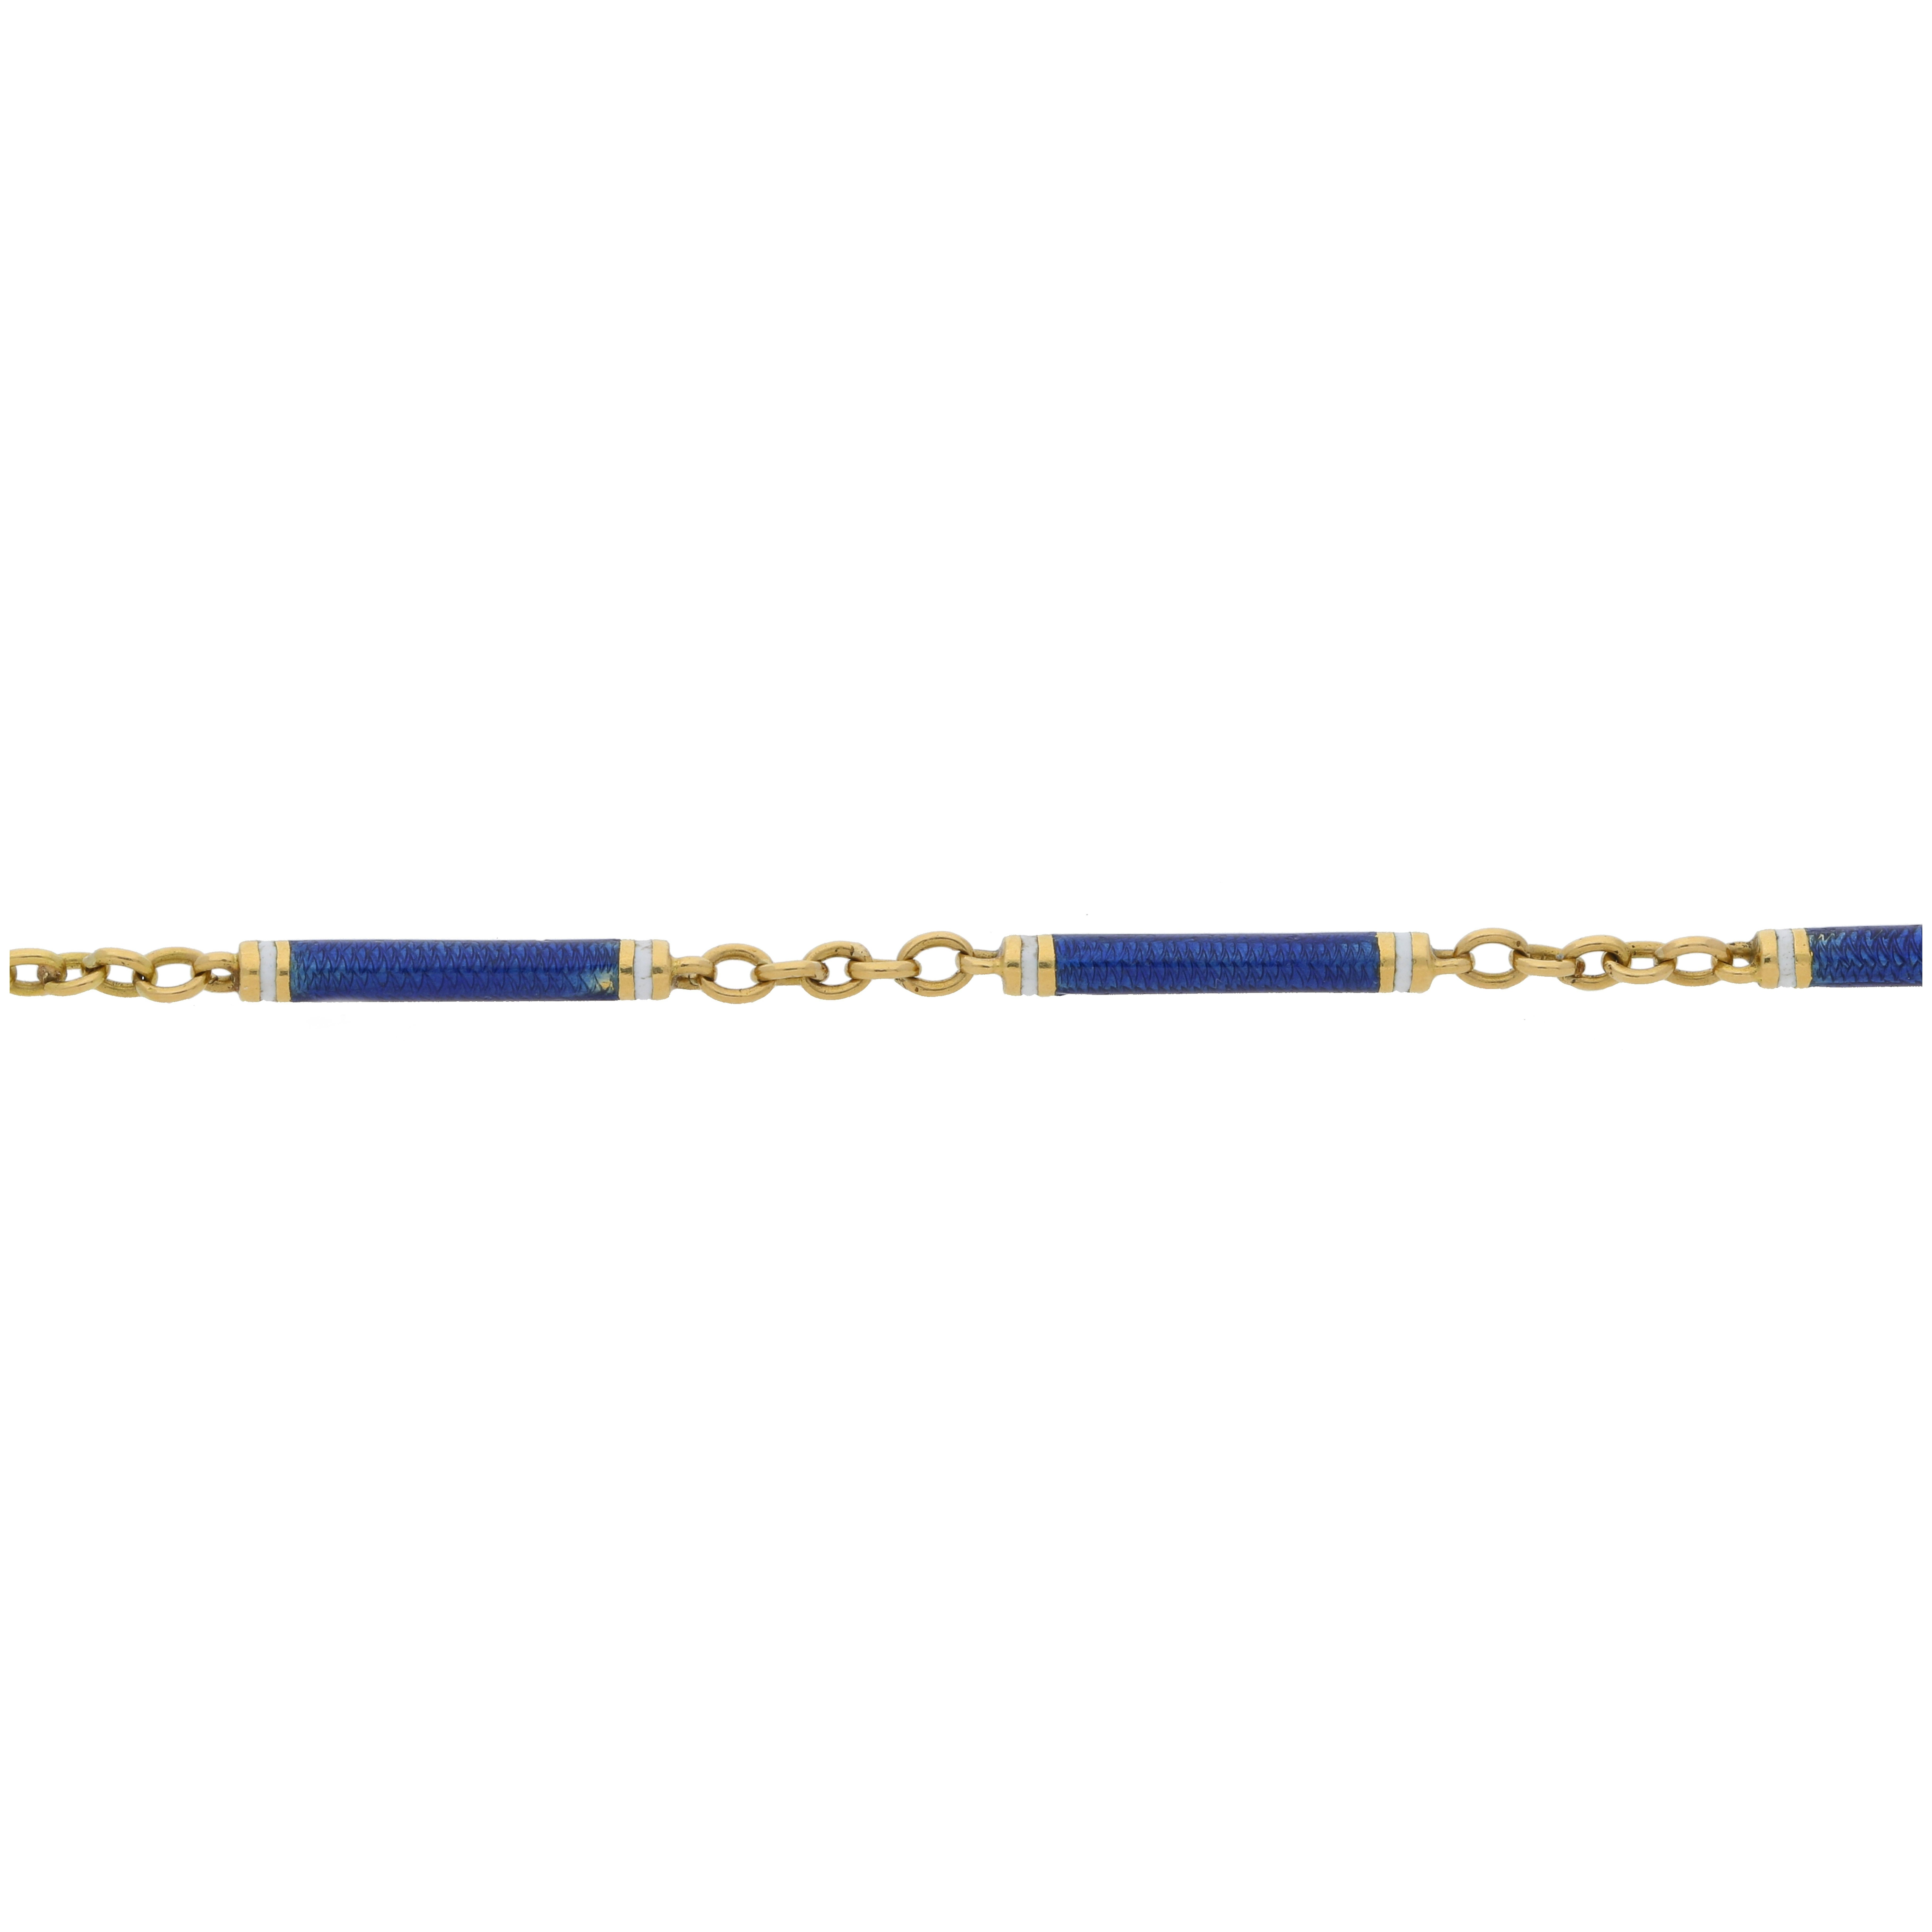 An elegant late Victorian necklace. The necklace is formed nineteen blue enamel batons with white enamel detail at each end. Each baton is interspersed with 18ct yellow gold interlocking rings. This necklace measures 20 inches length.